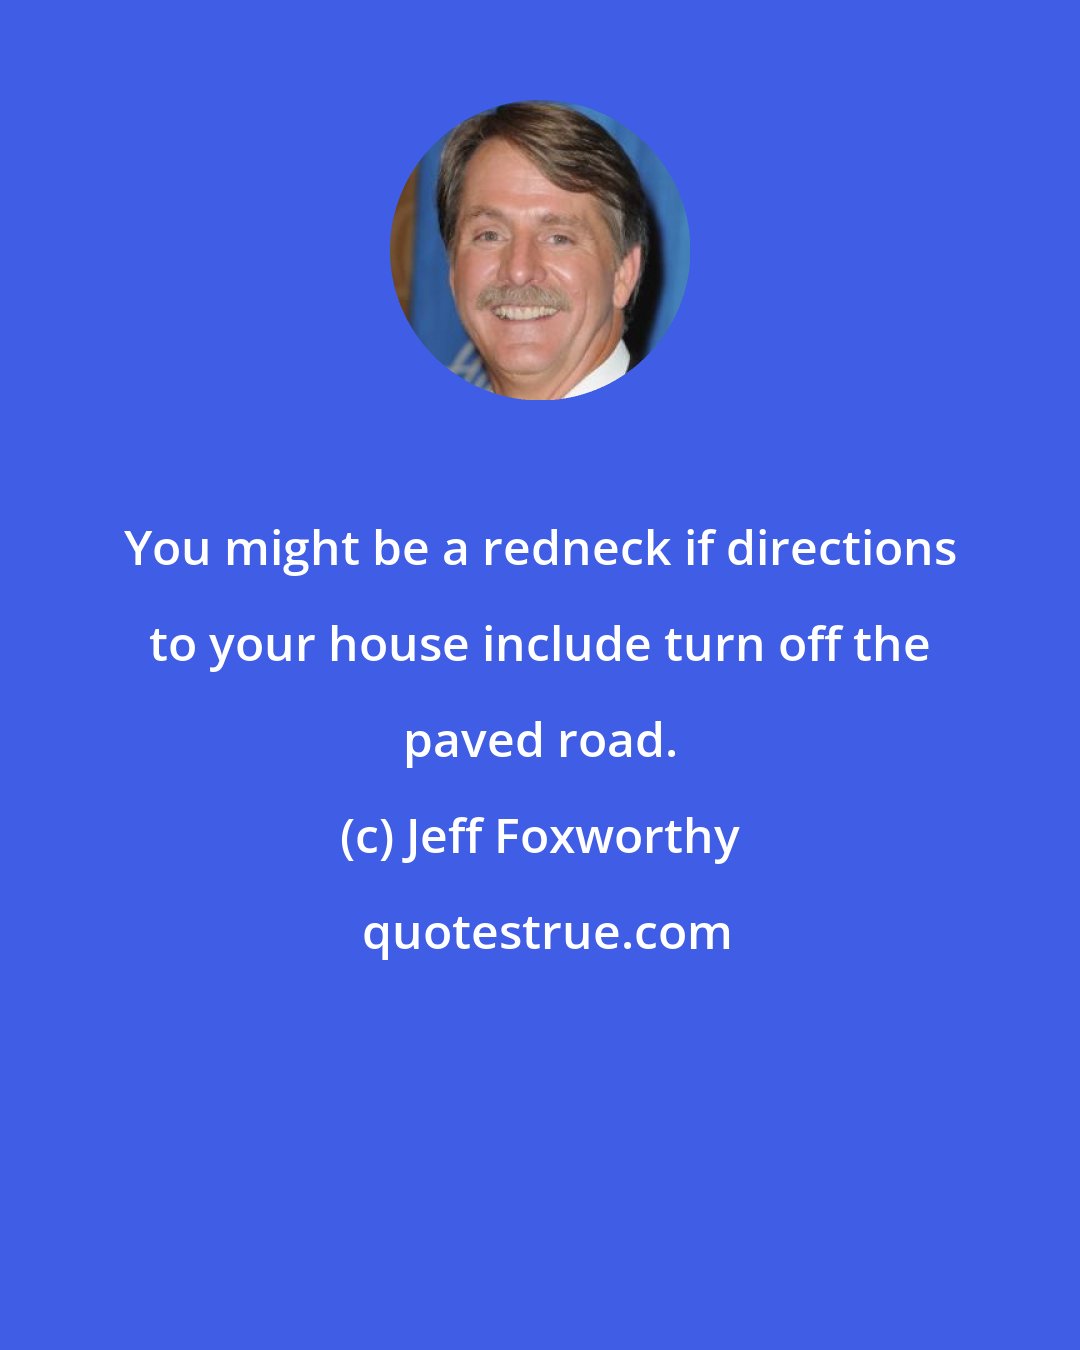 Jeff Foxworthy: You might be a redneck if directions to your house include turn off the paved road.